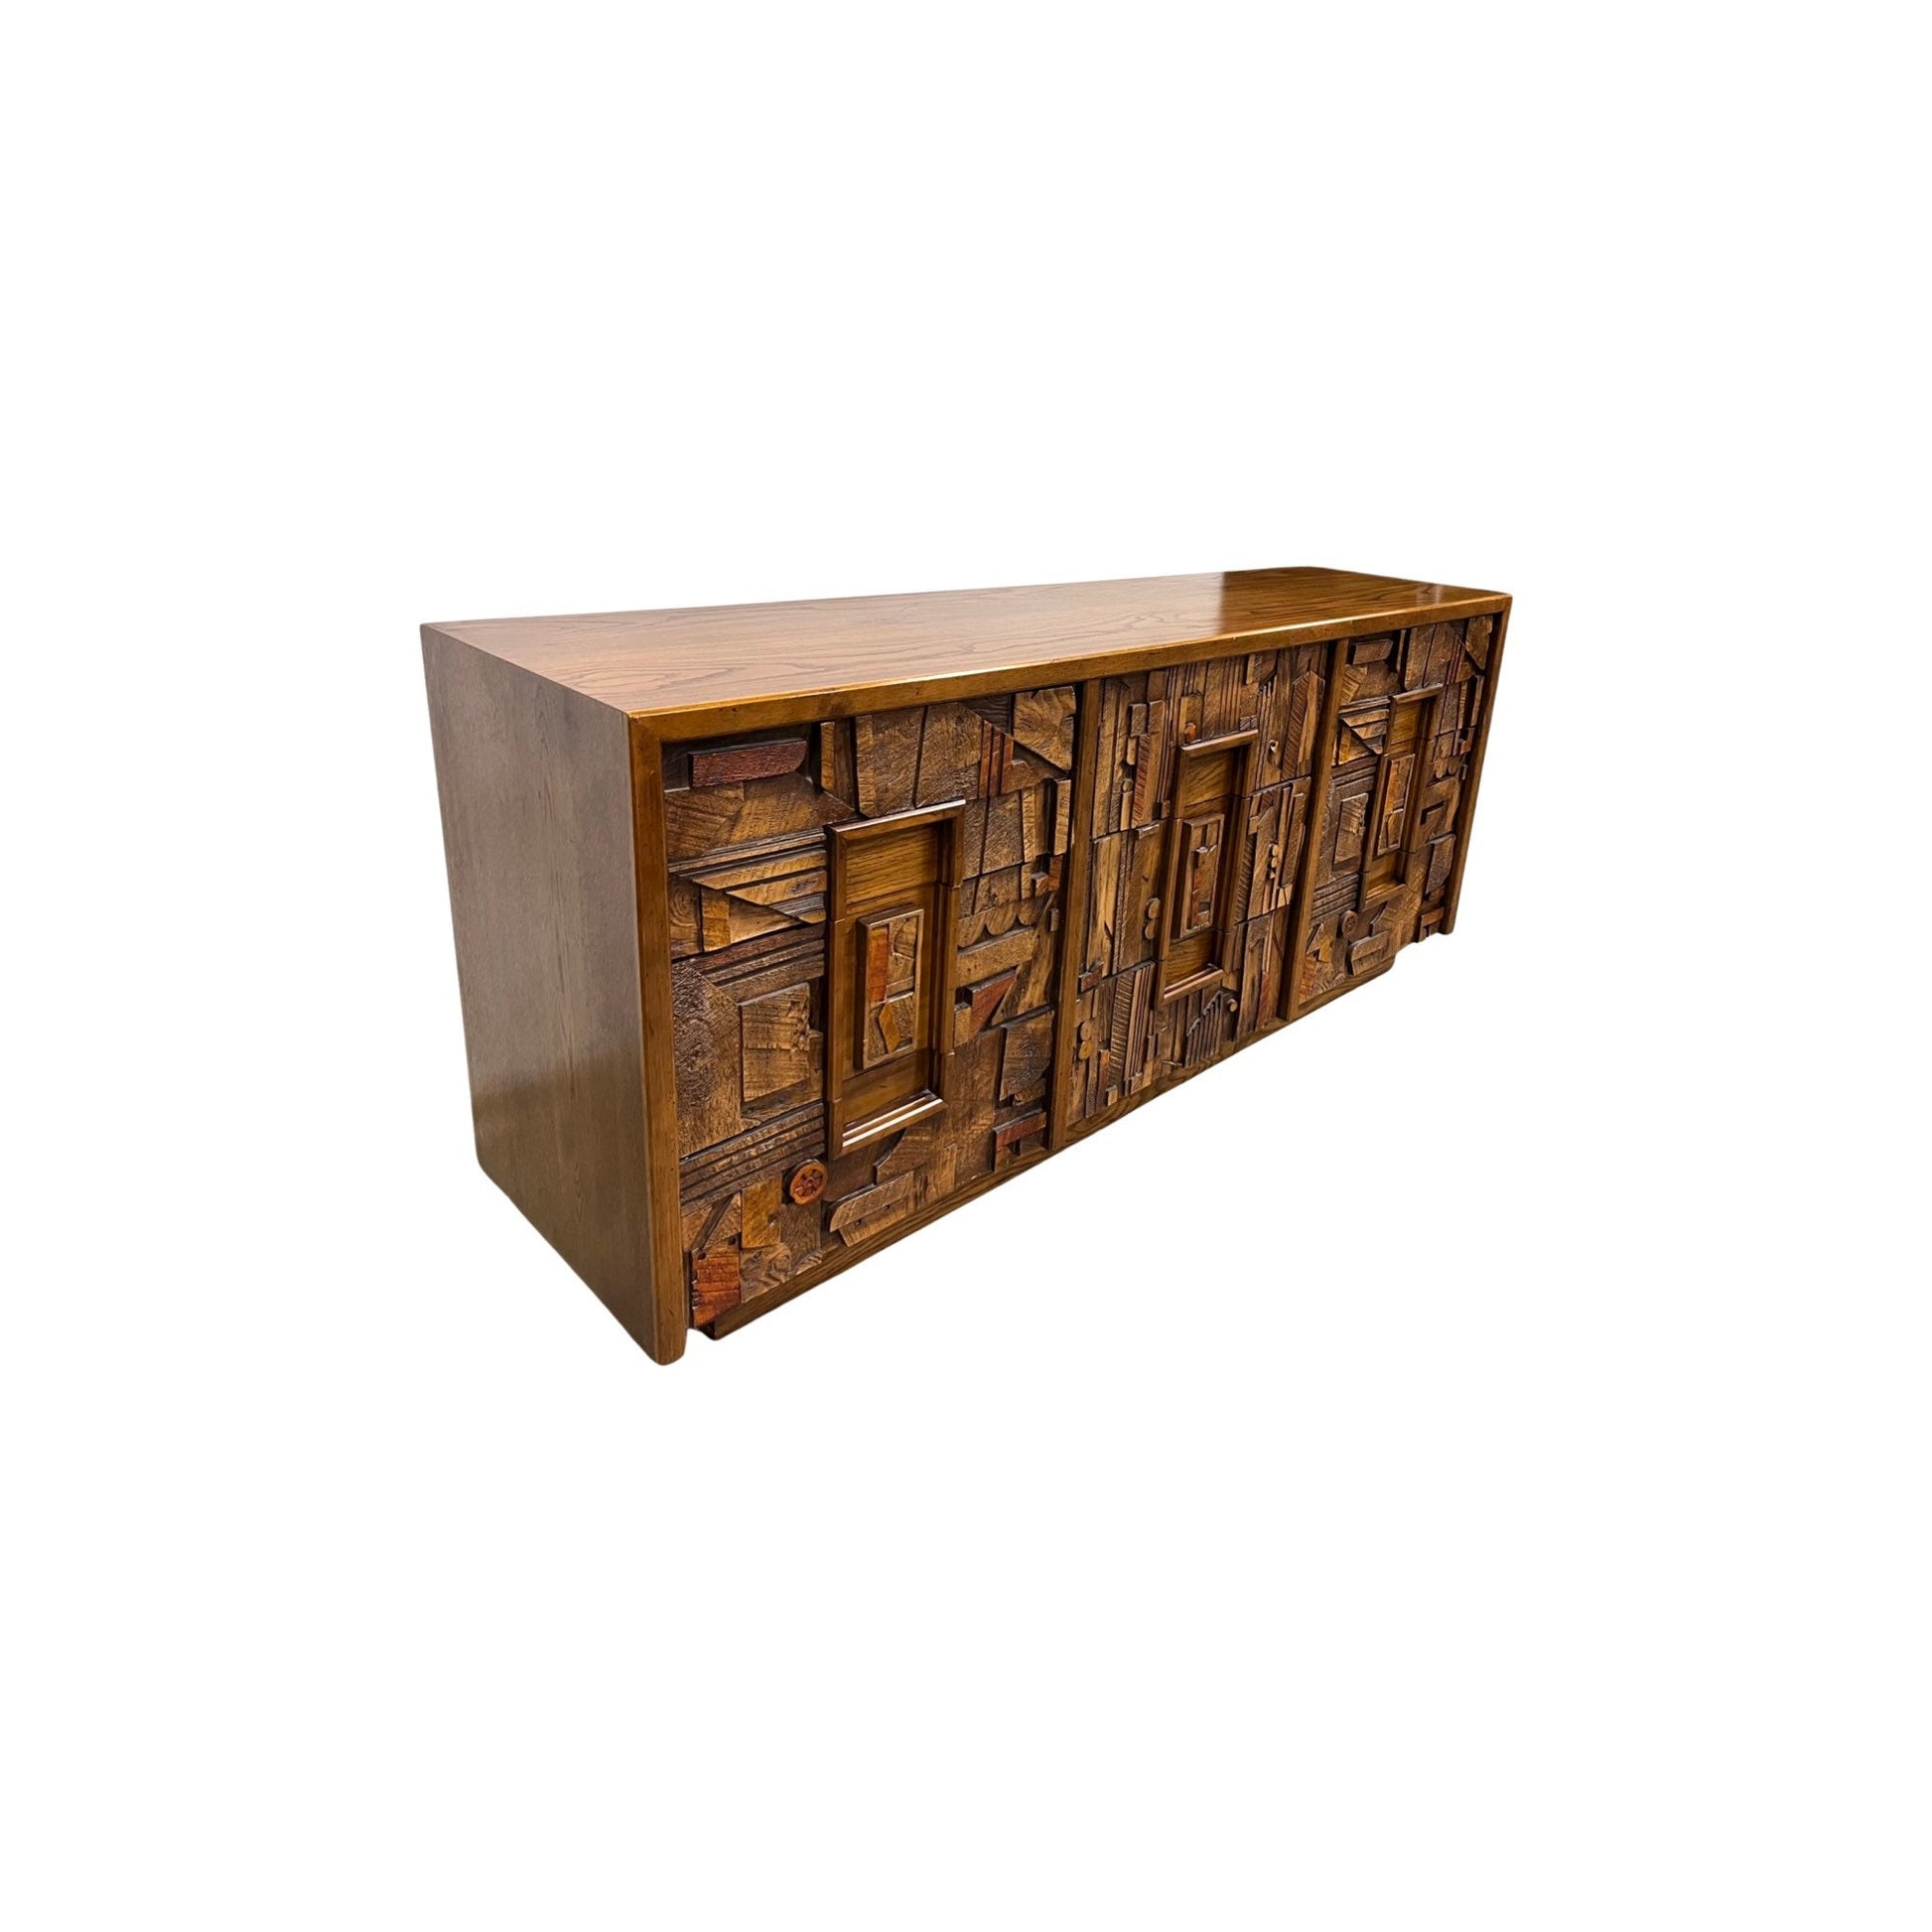 Masterfully crafted lowboy dresser from Lane Furniture's Pueblo line inspired by renowned brutalist designer Paul Evans with intricate brutalist pattern on all nine drawers